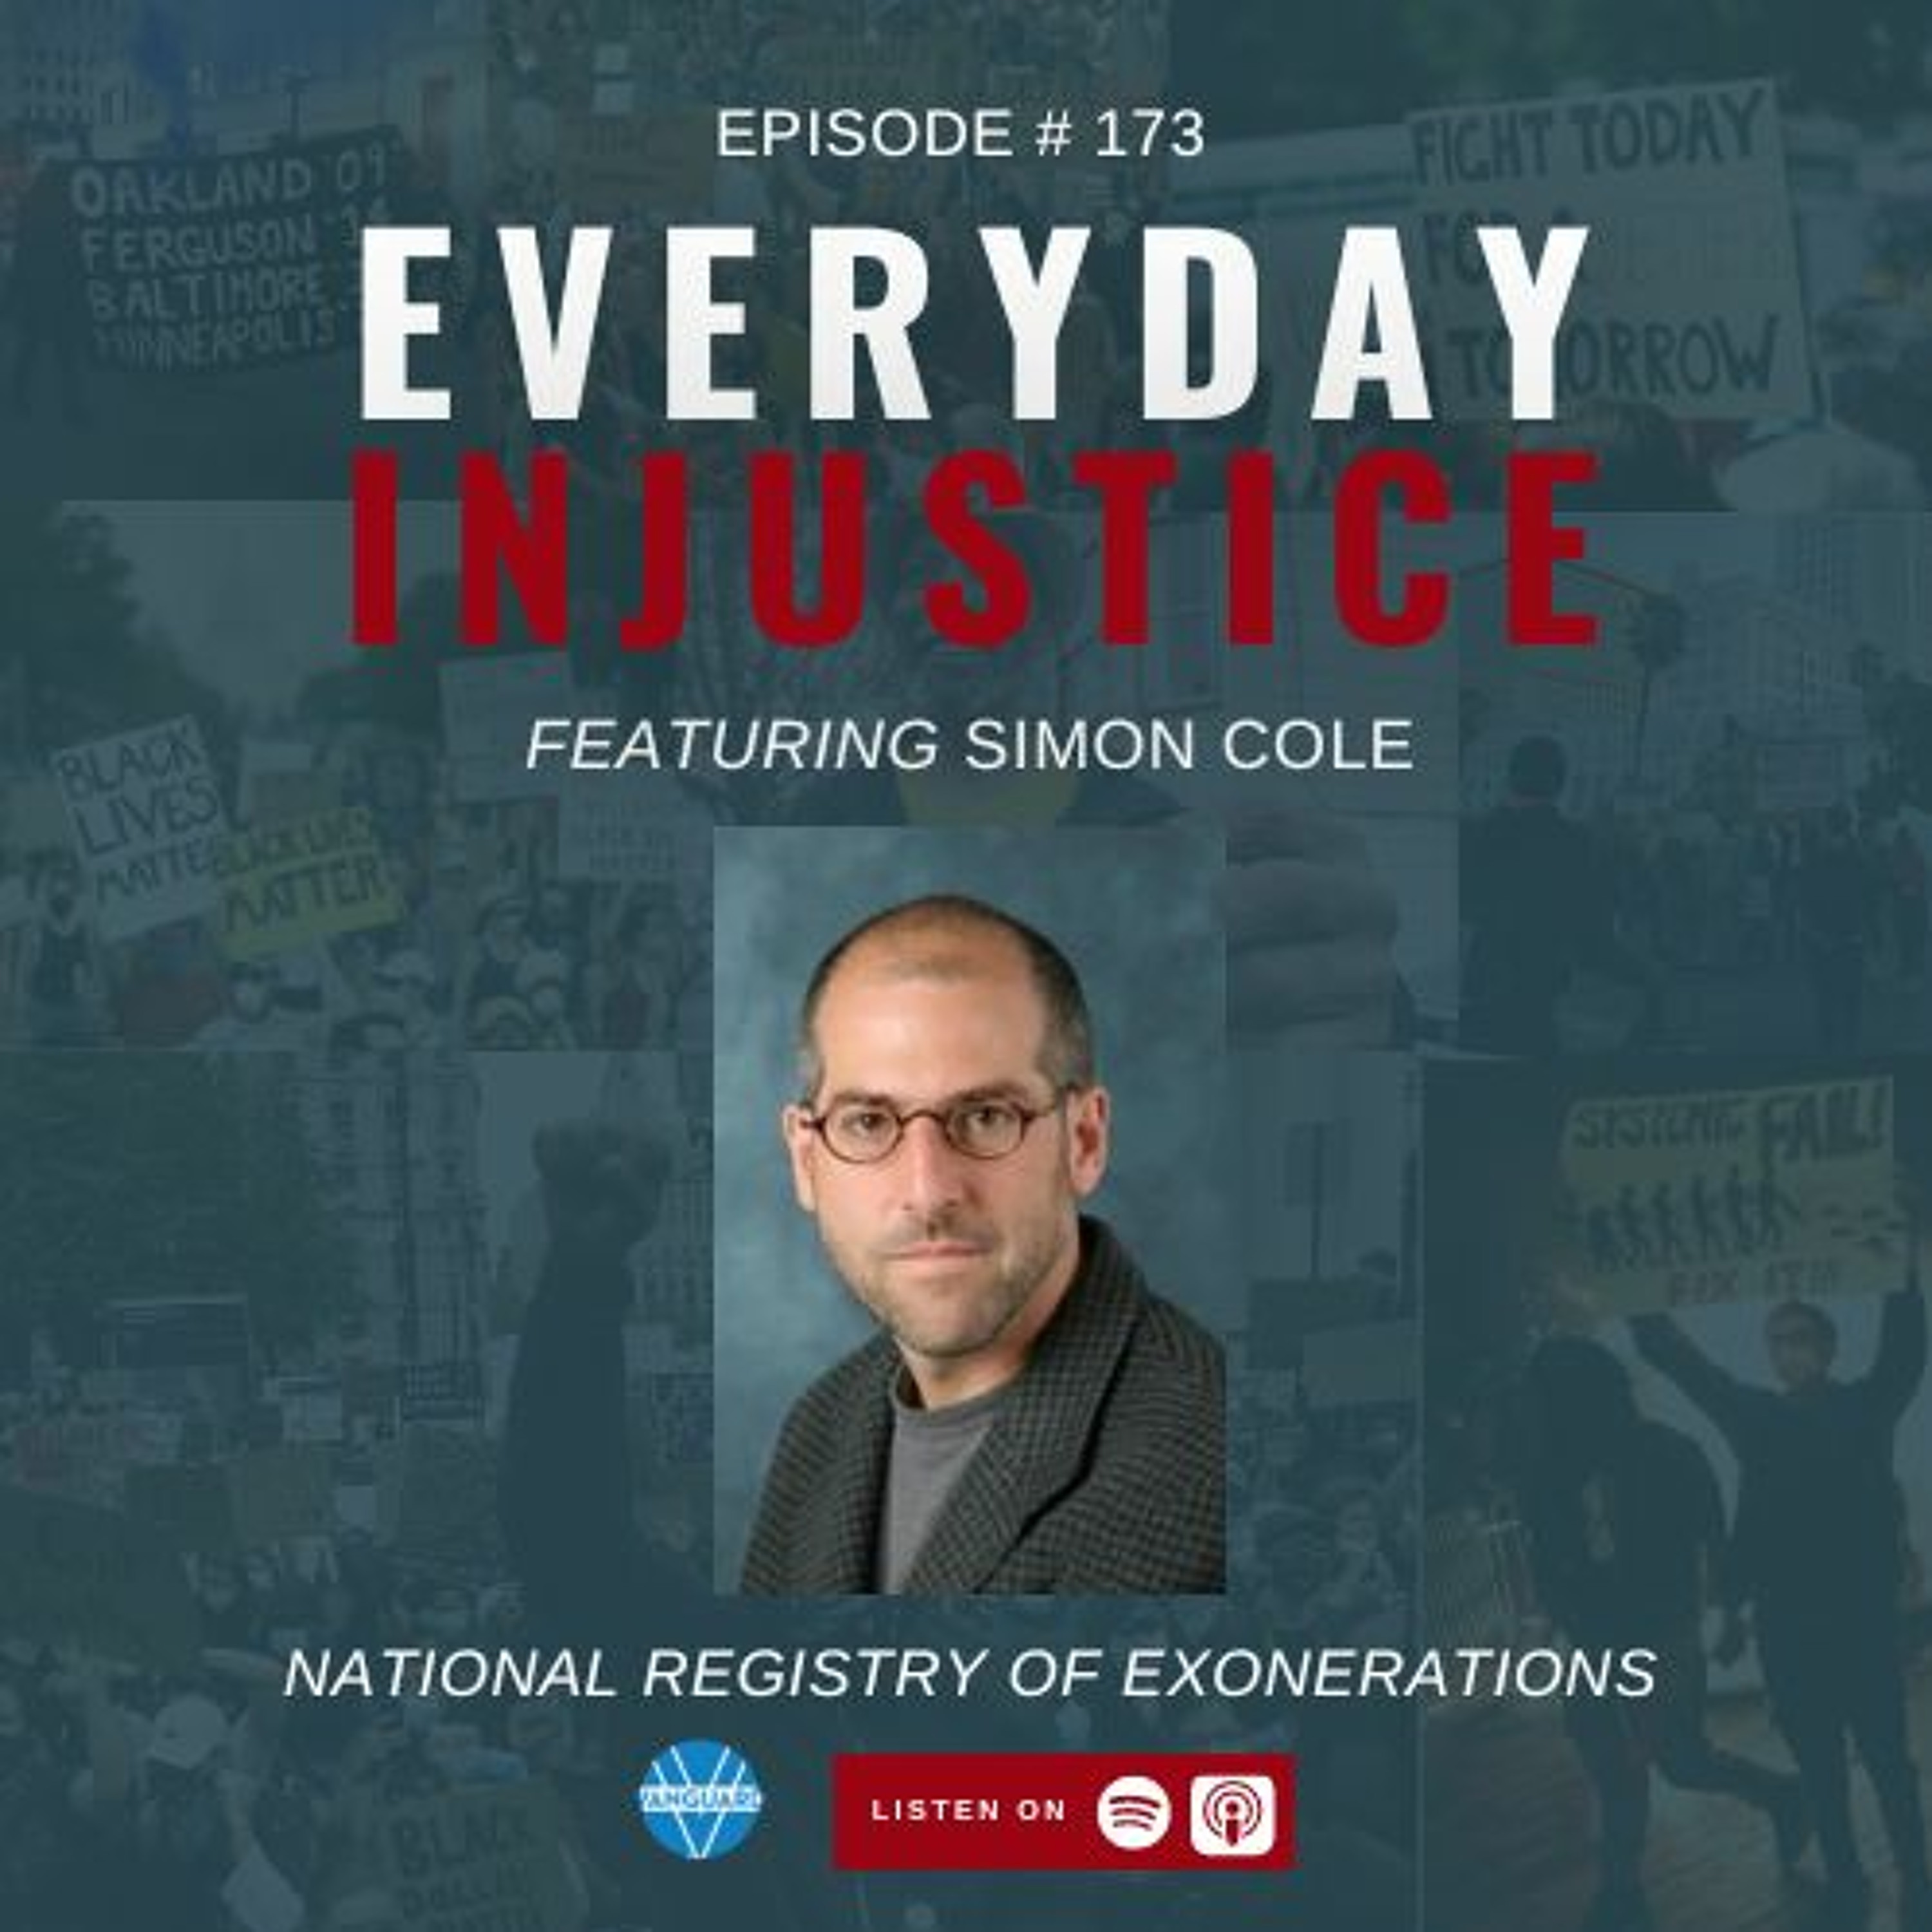 Everyday Injustice Podcast Episode 173: Simon Cole, Director of National Registry of Exonerations